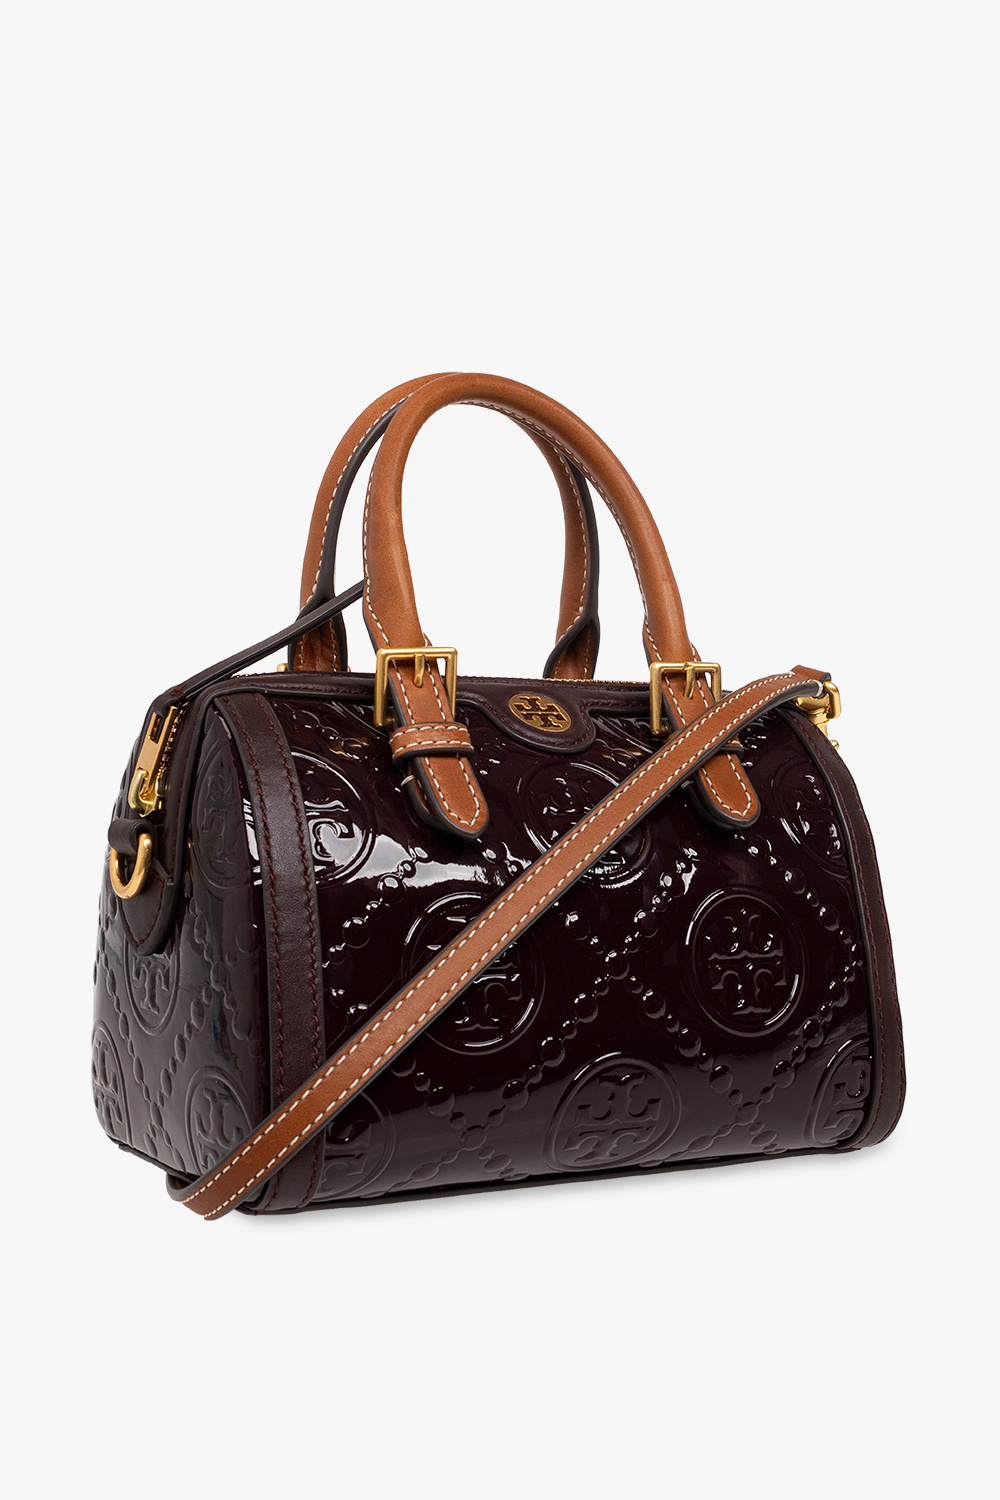 Tory Burch Shoulder Loudon bag in patent leather